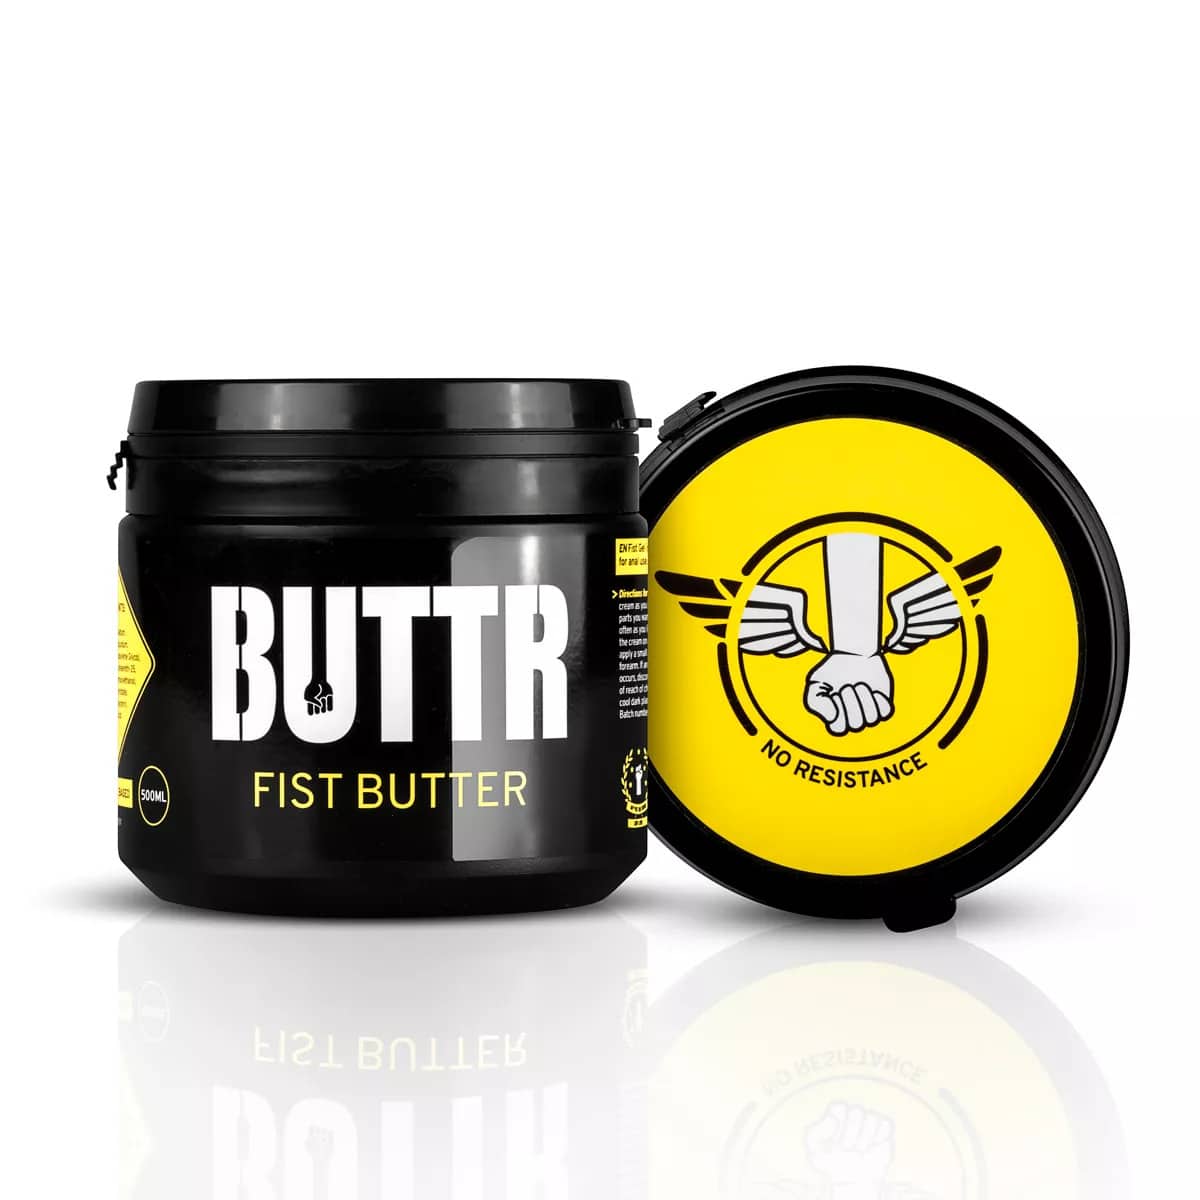 TOP BUTTR Fisting Butter